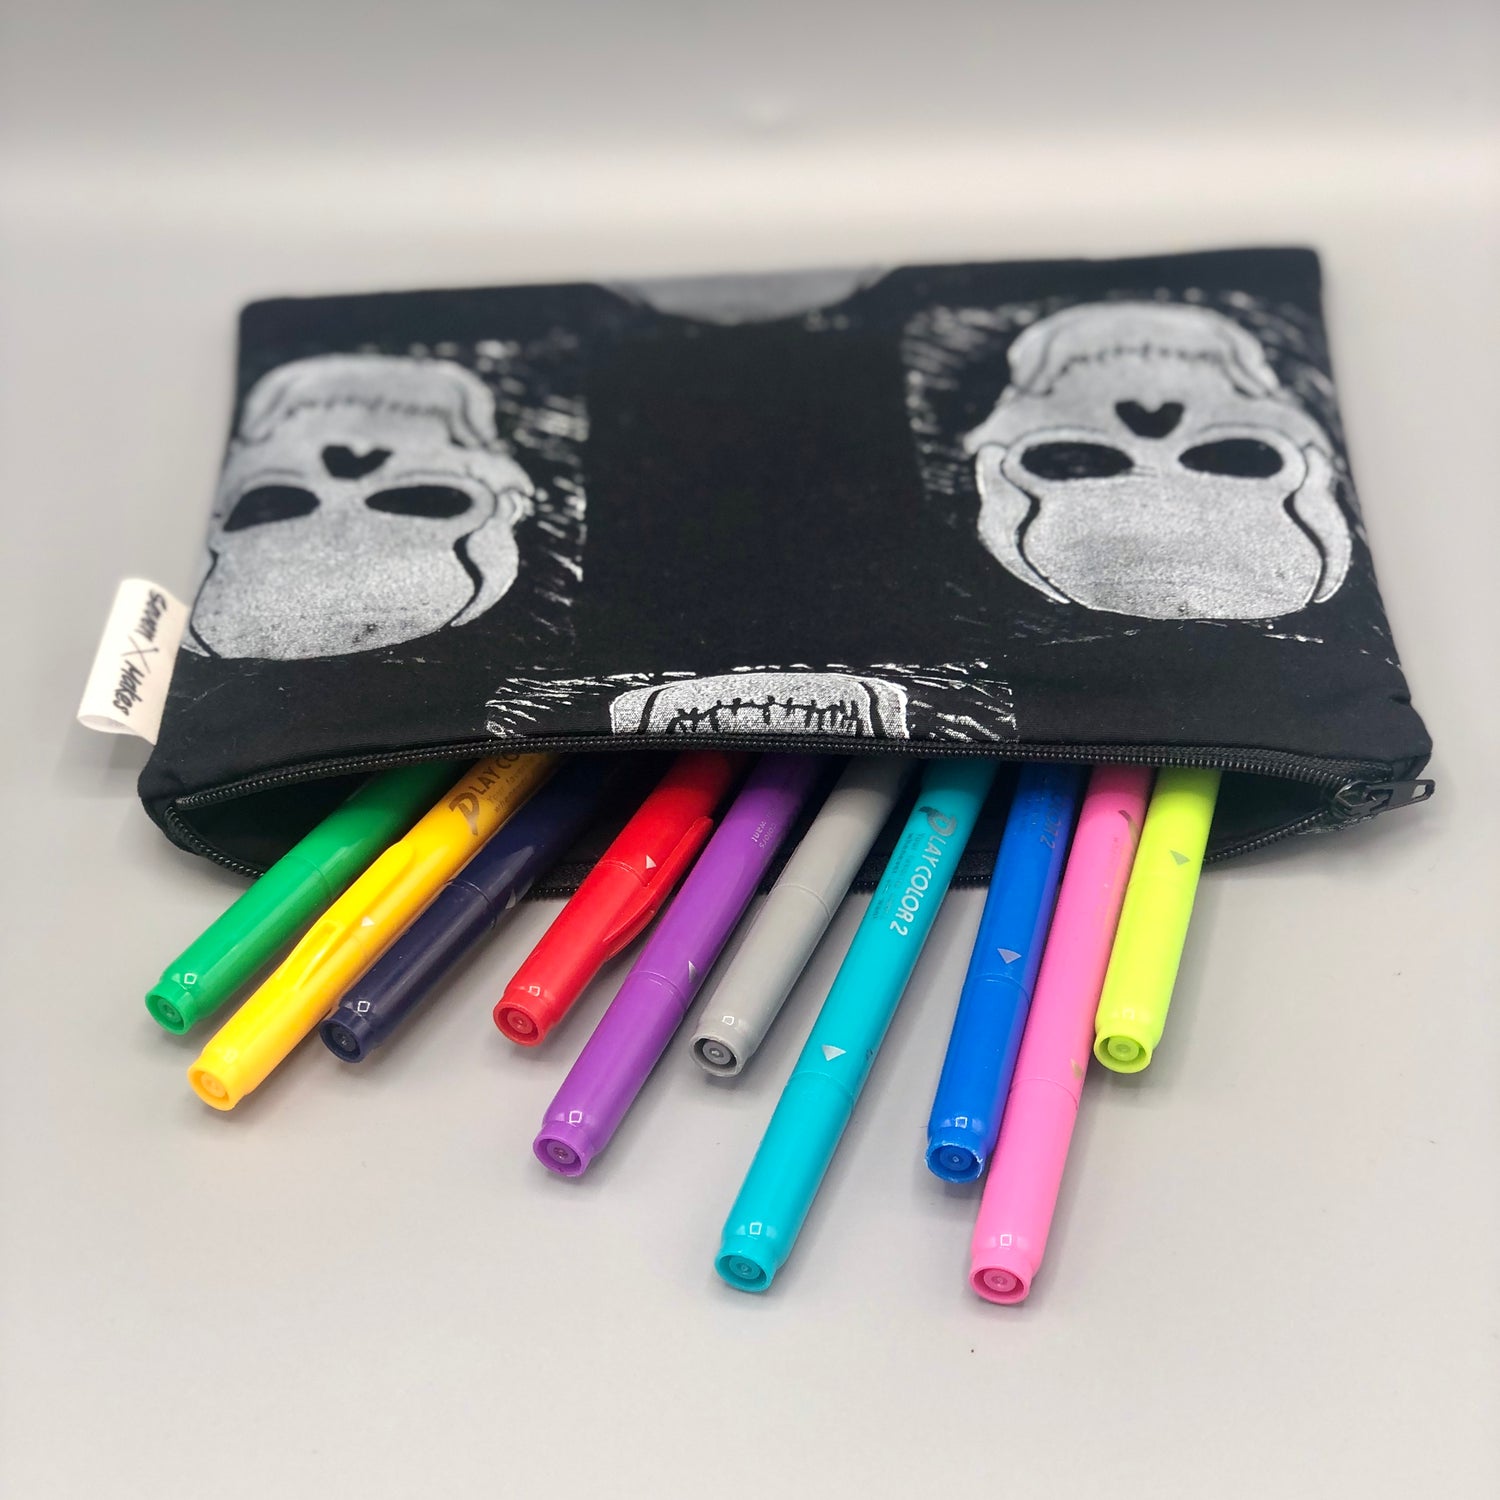 Hand printed Skull Fabric Zipper Pouch - two sizes and with waterproof lining option